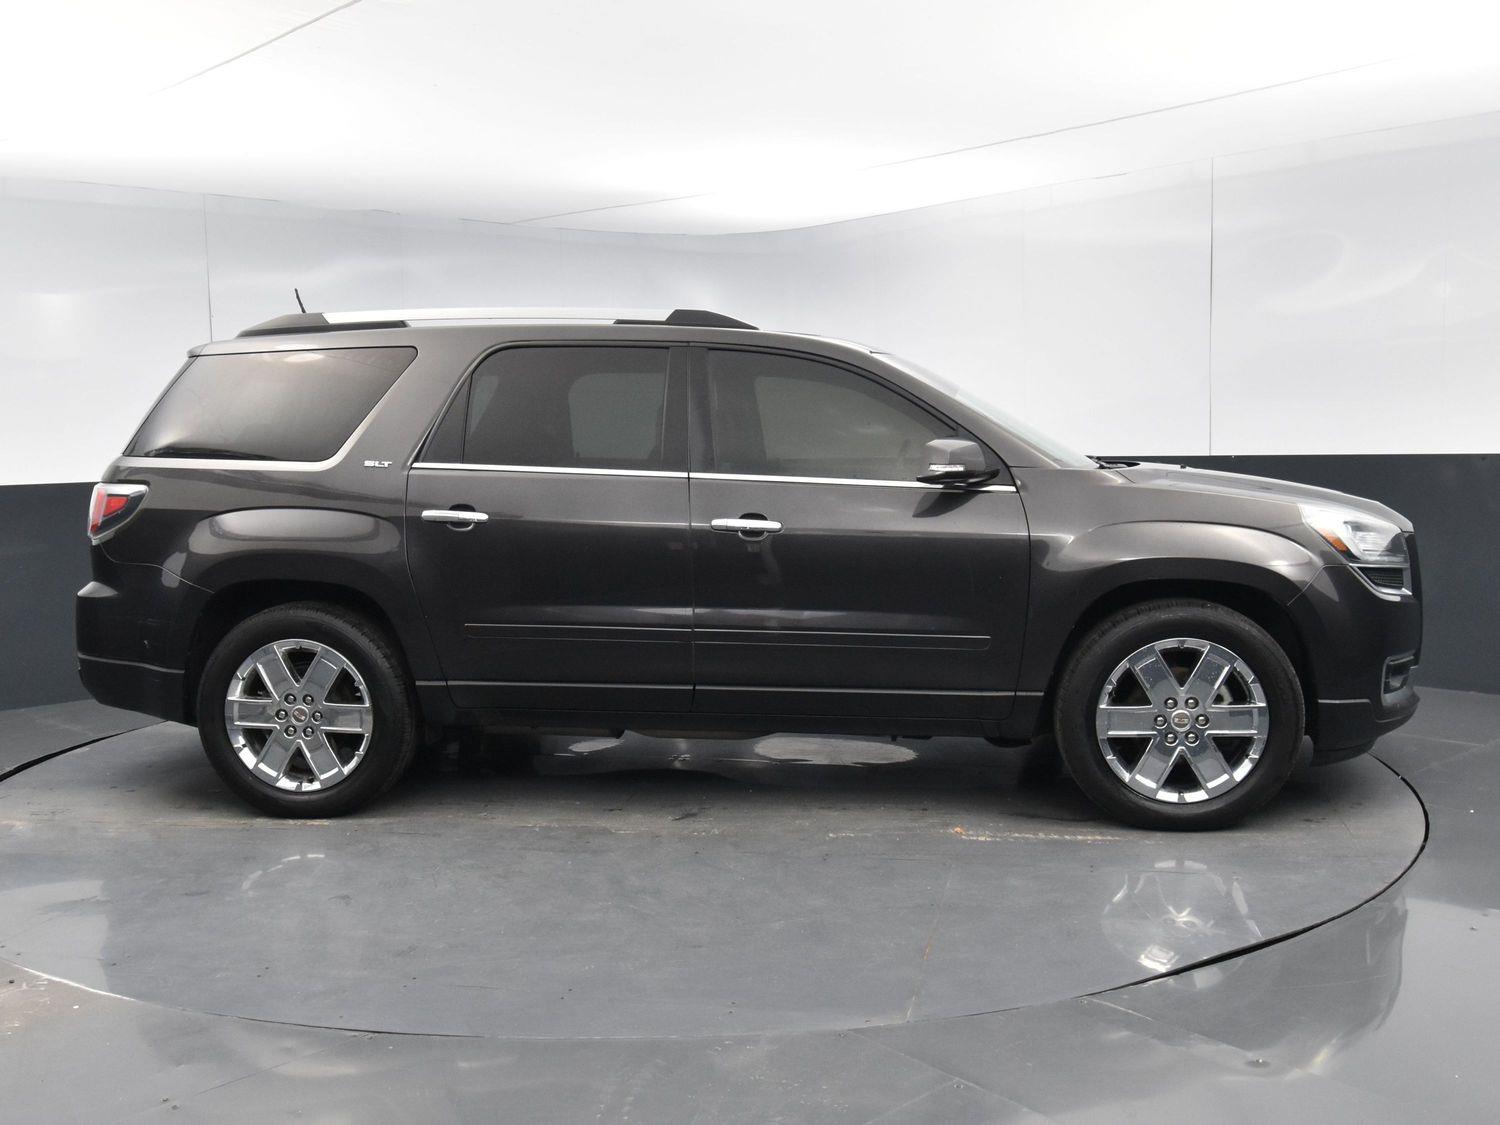 Used 2017 GMC Acadia Limited Limited 4 door for sale in Grand Island NE